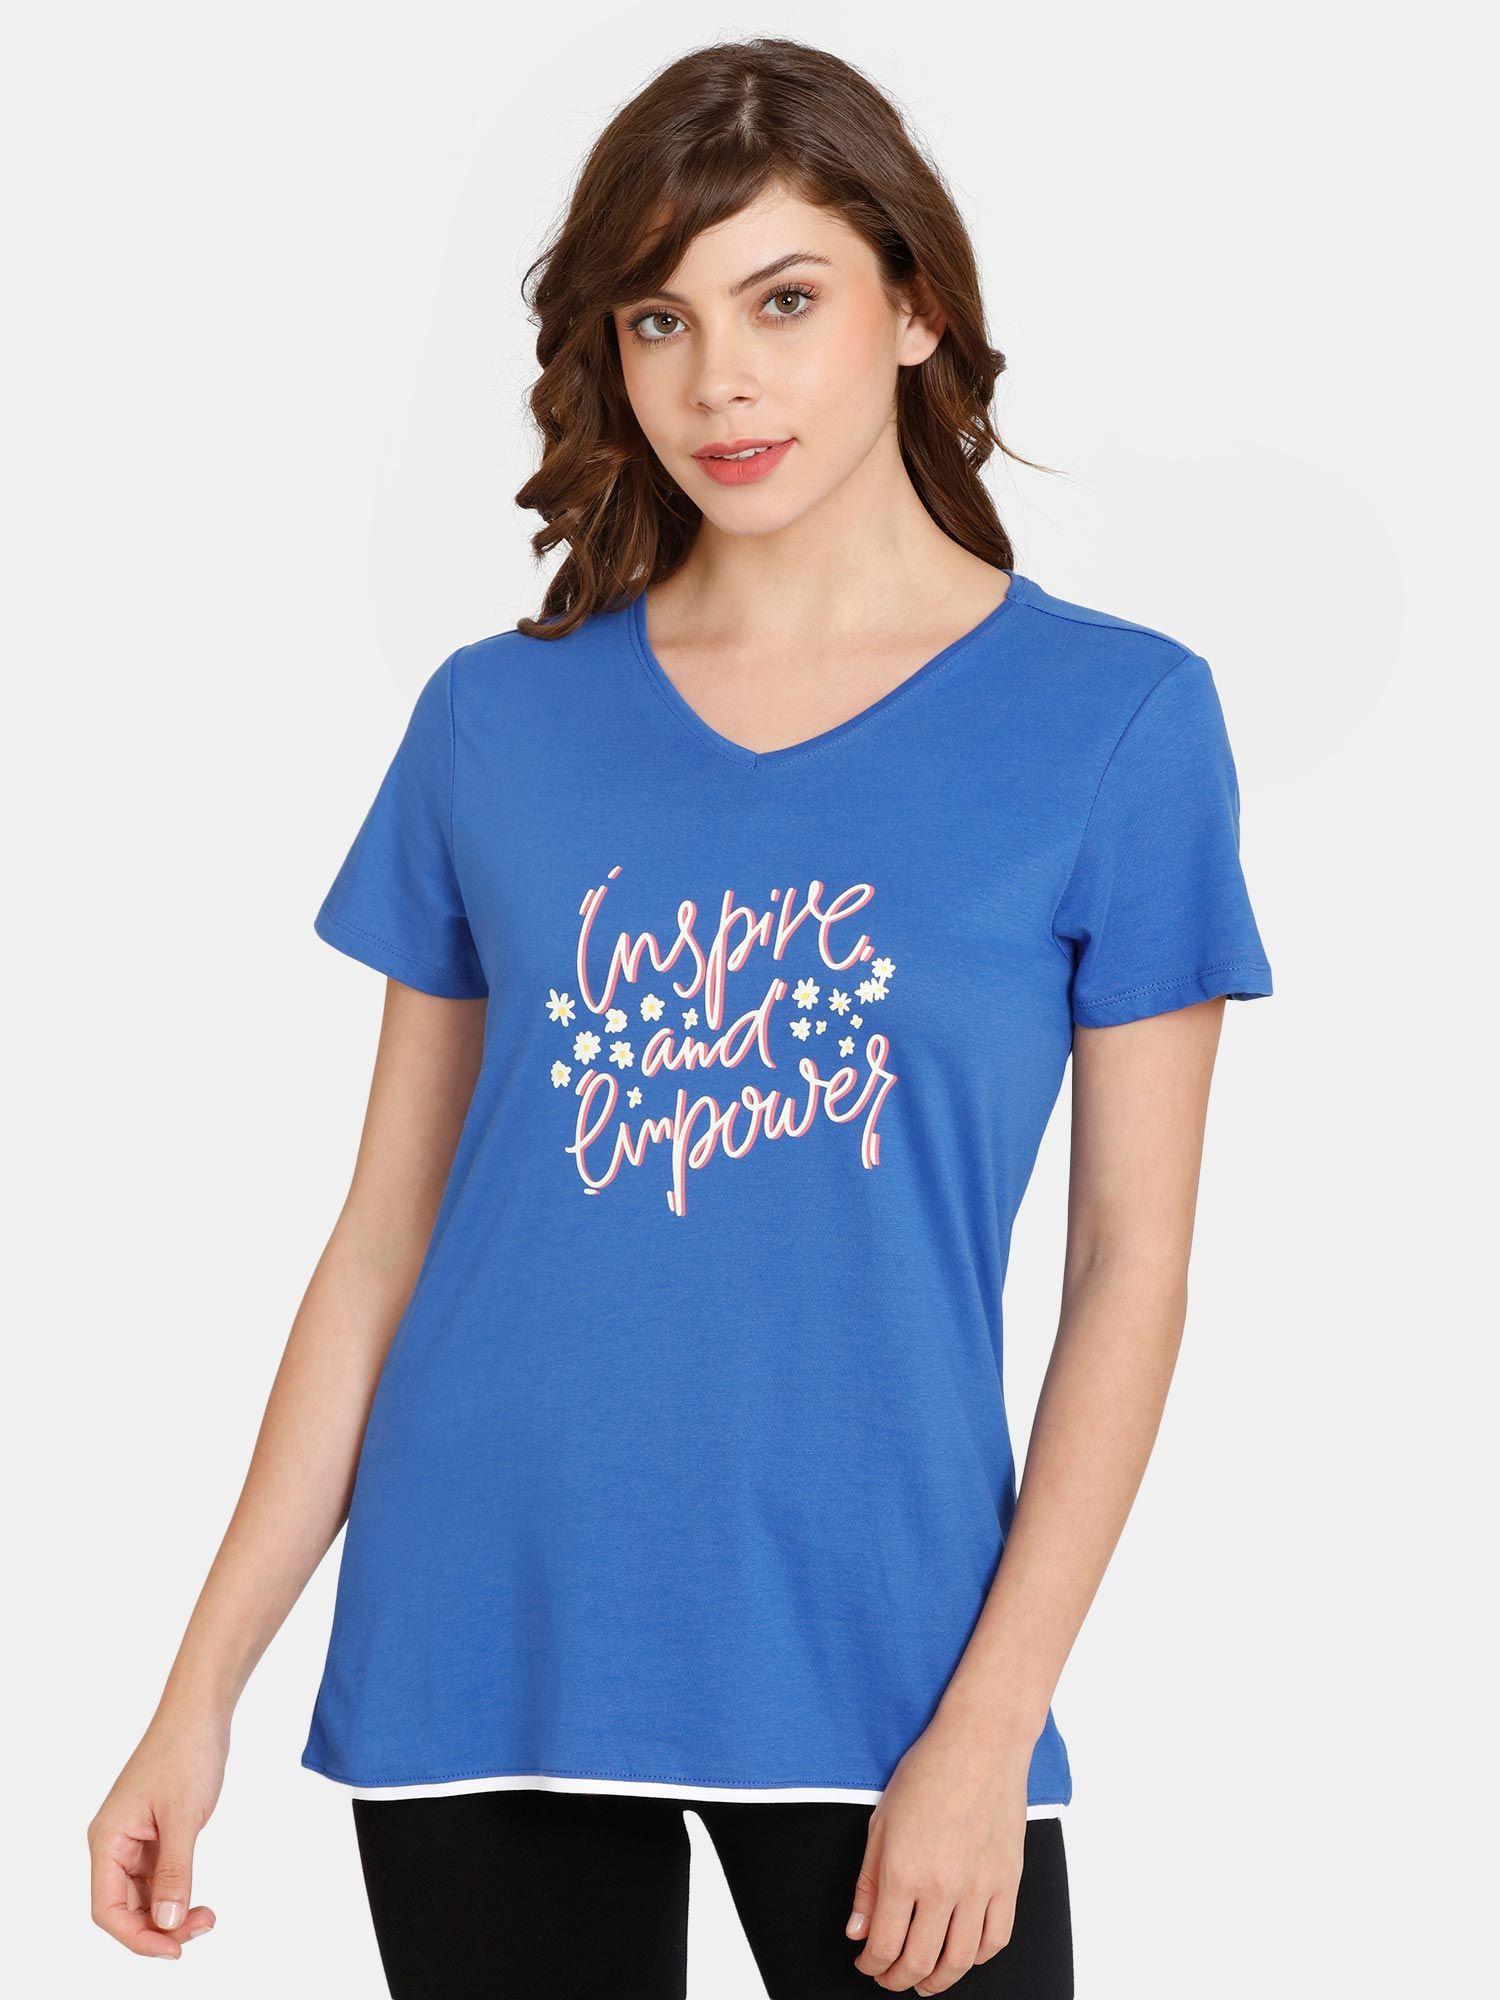 rosaline dream land relaxed fit poly cotton top - beaucoup blue